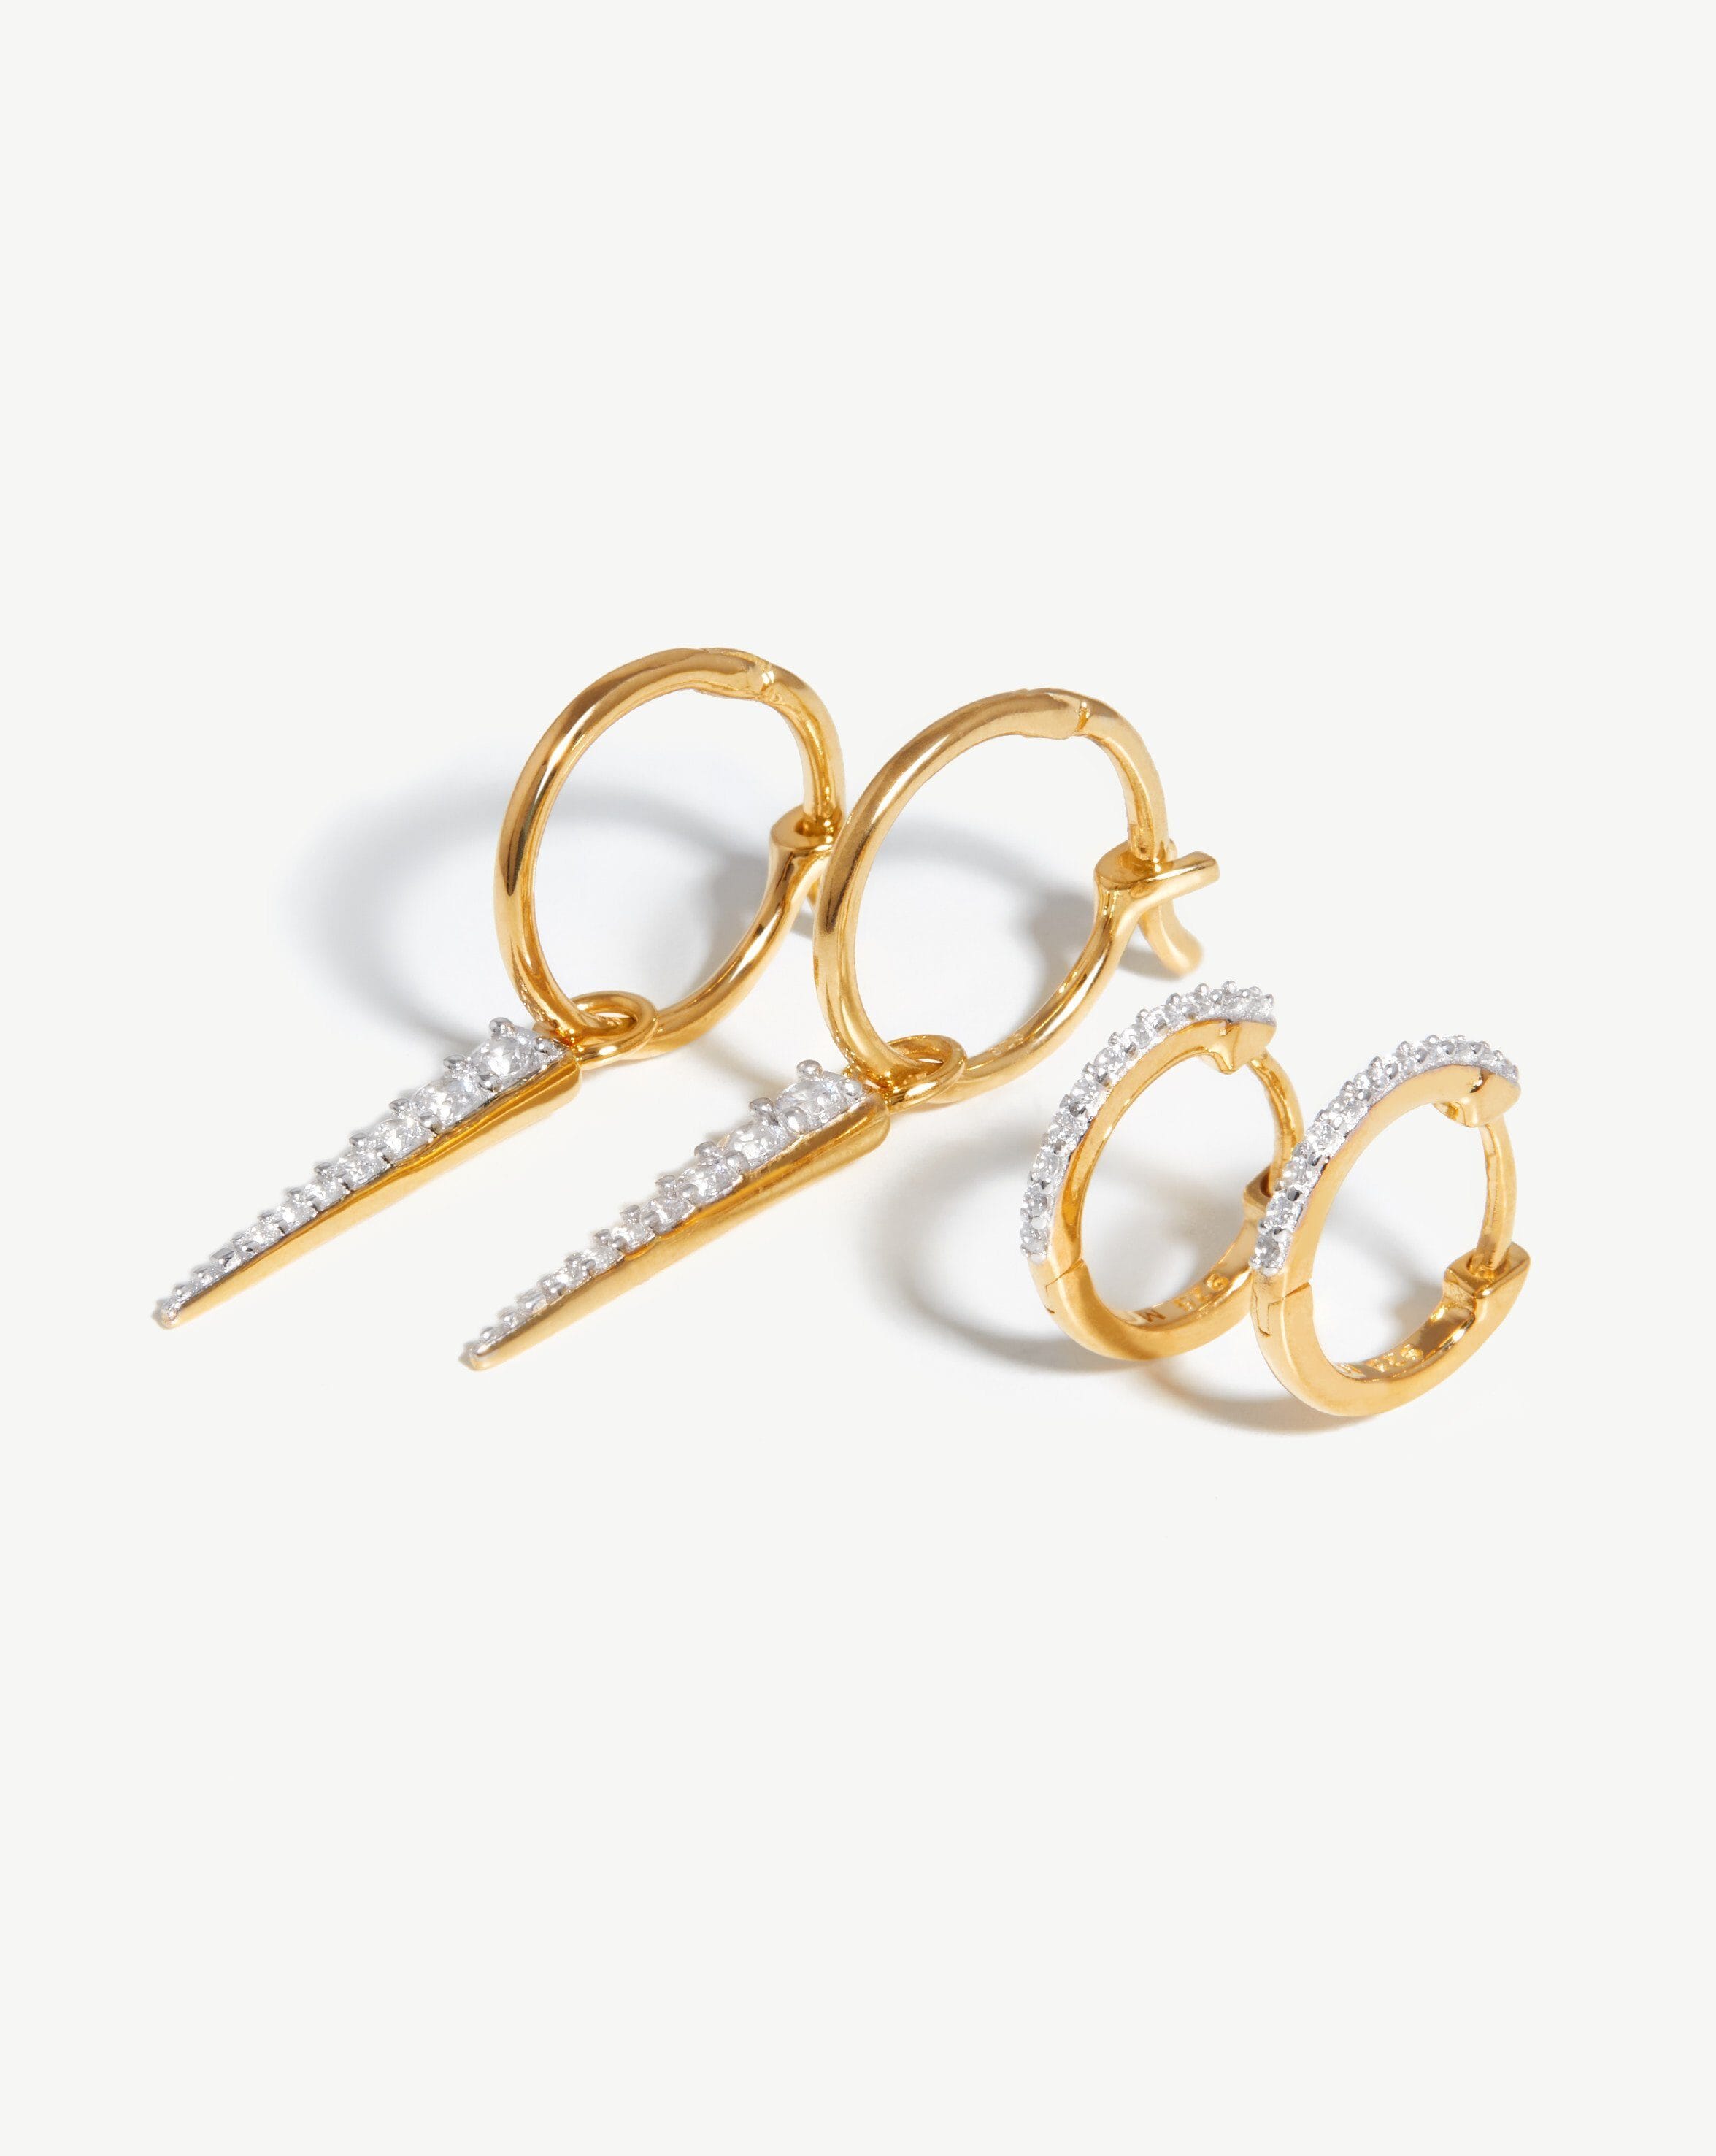 Pave Spike Ear Stack Gift Set | 18ct Gold Plated Vermeil/Pave Earrings Missoma 